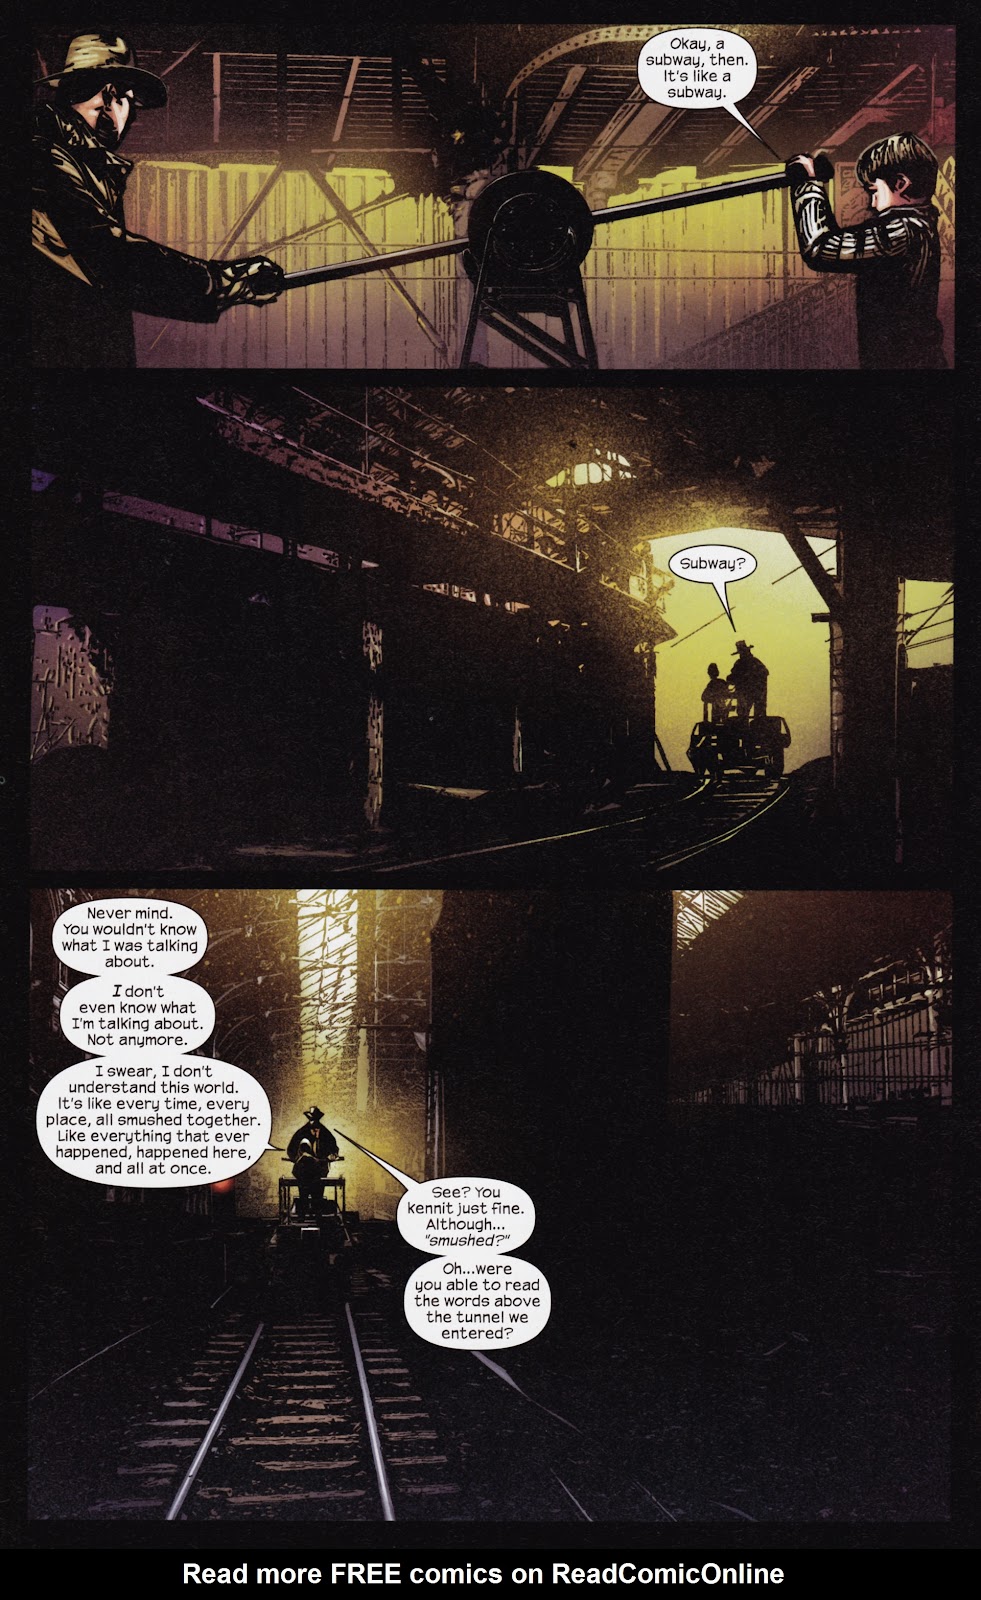 Dark Tower: The Gunslinger - The Man in Black issue 3 - Page 16